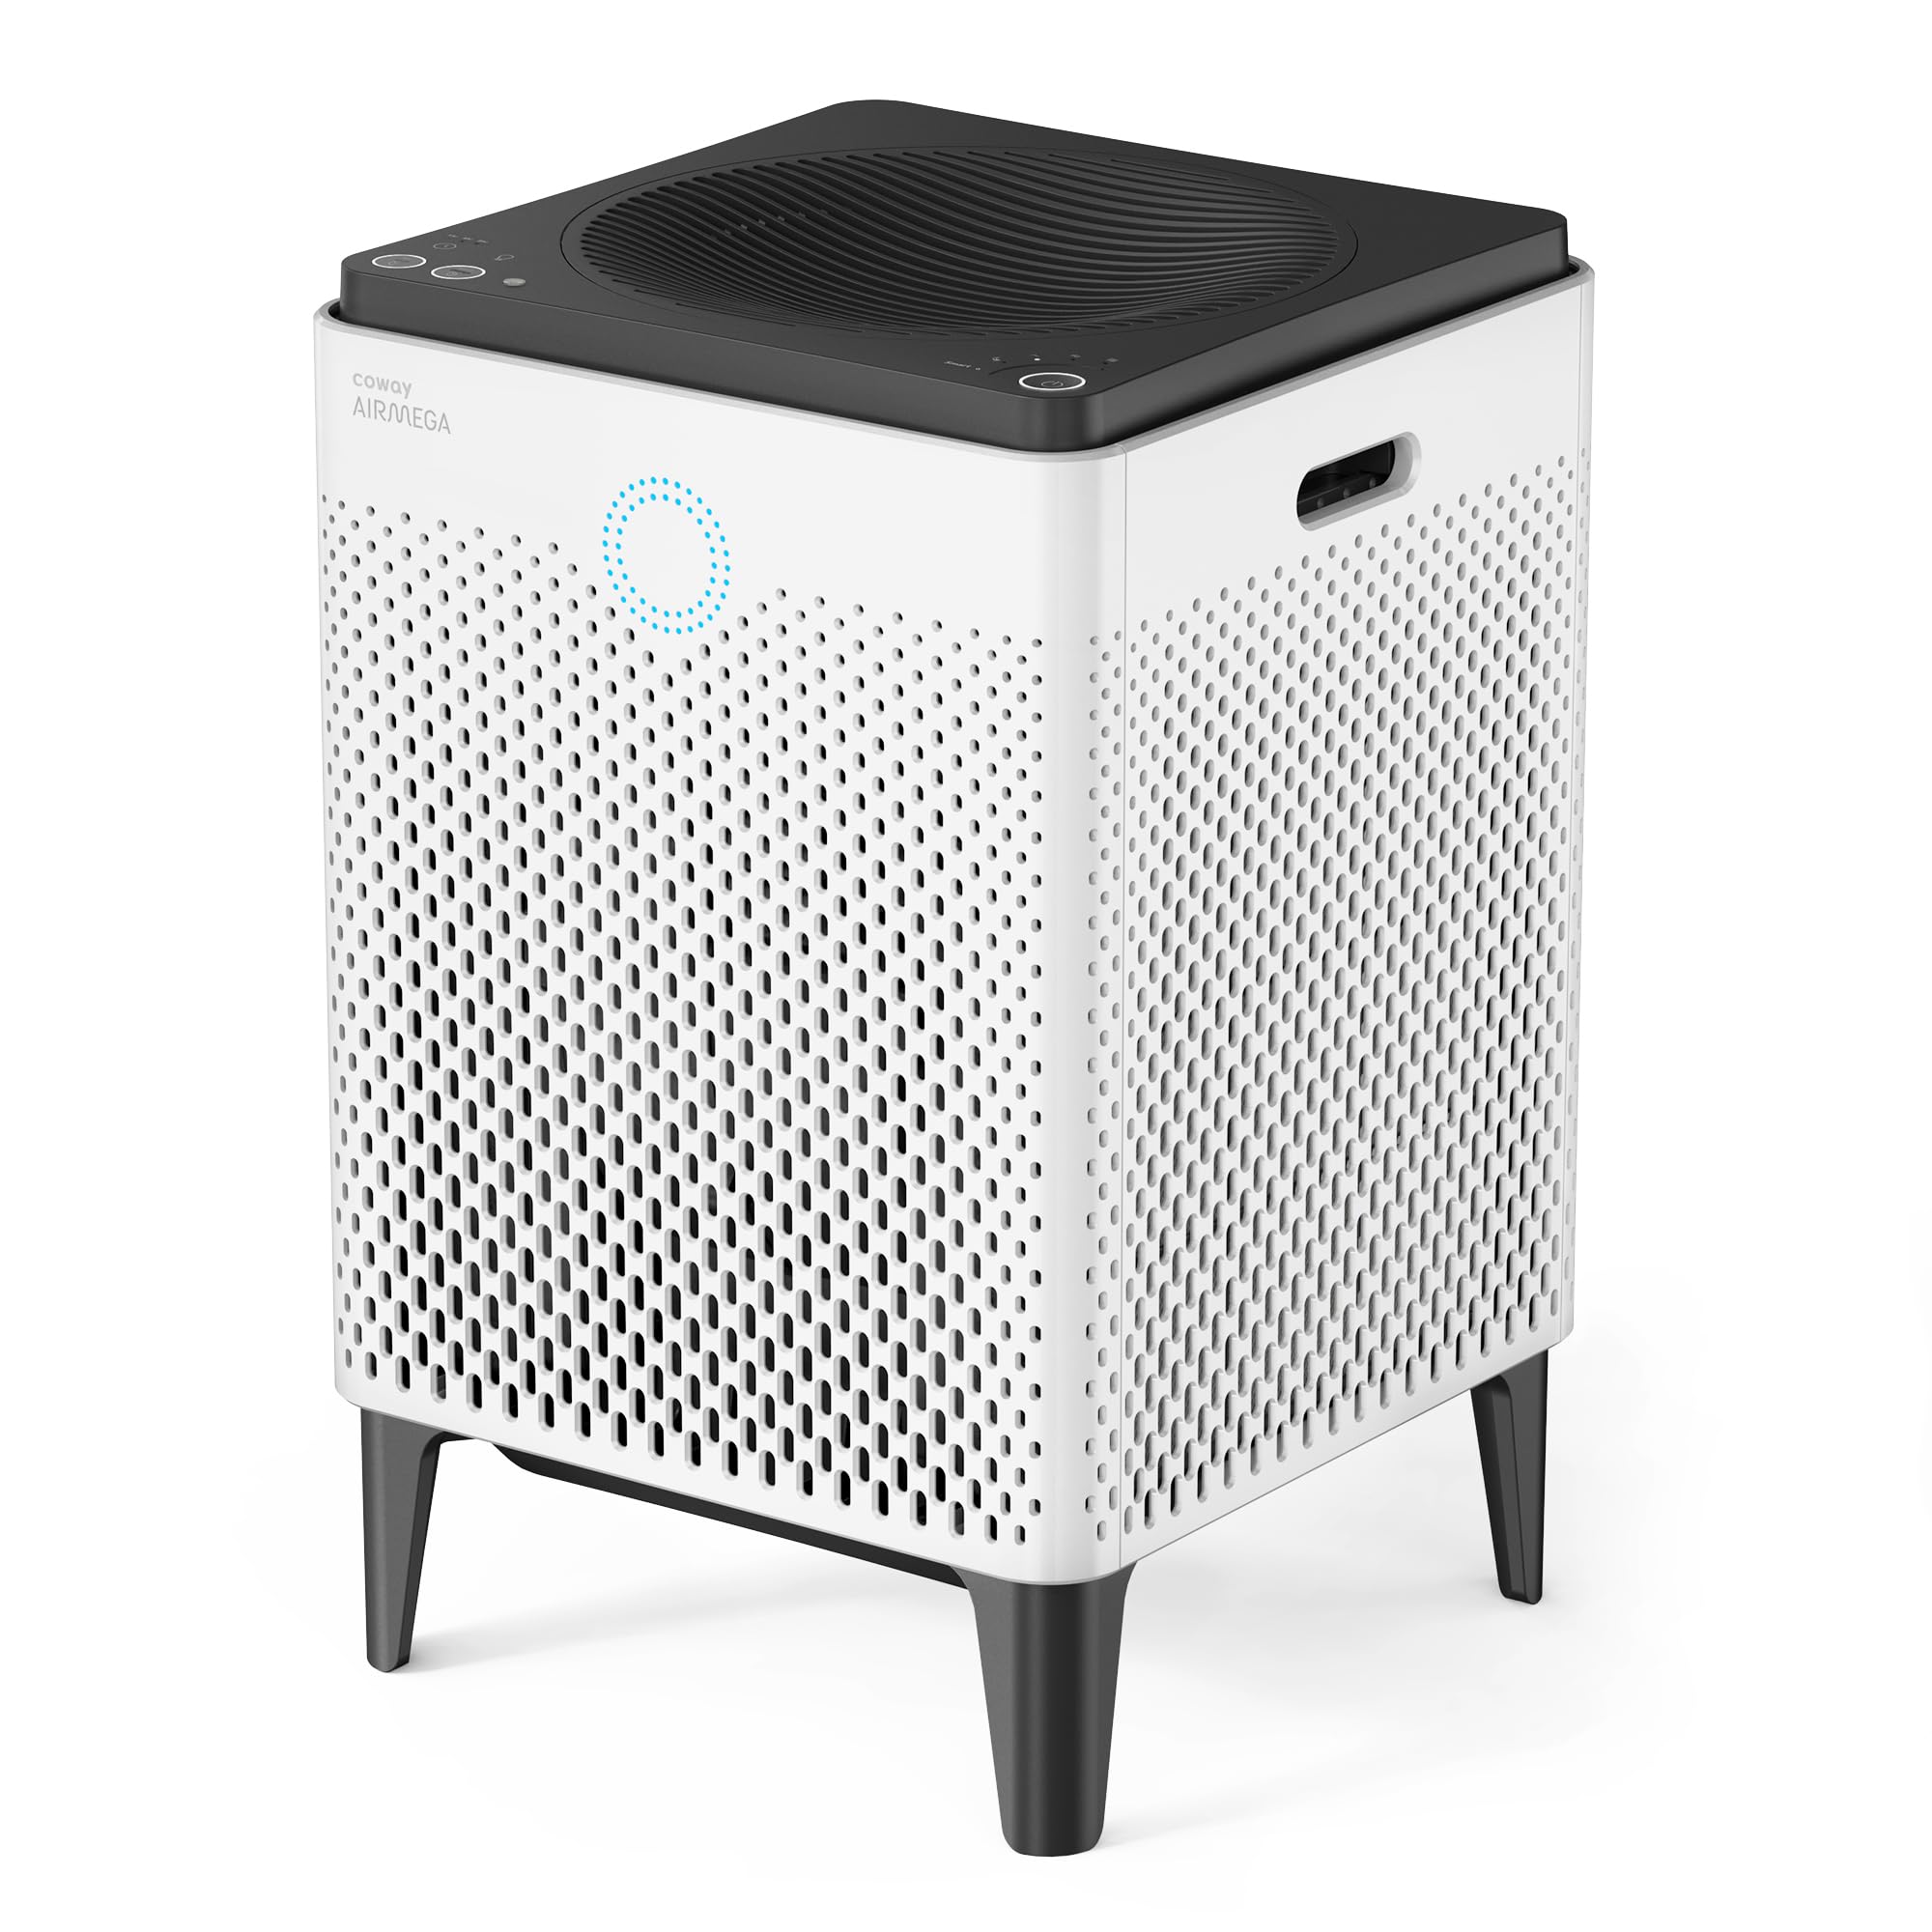 Coway Airmega 400 True HEPA Air Purifier with Smart Technology, Covers 1,560 sq. ft, White $342.99